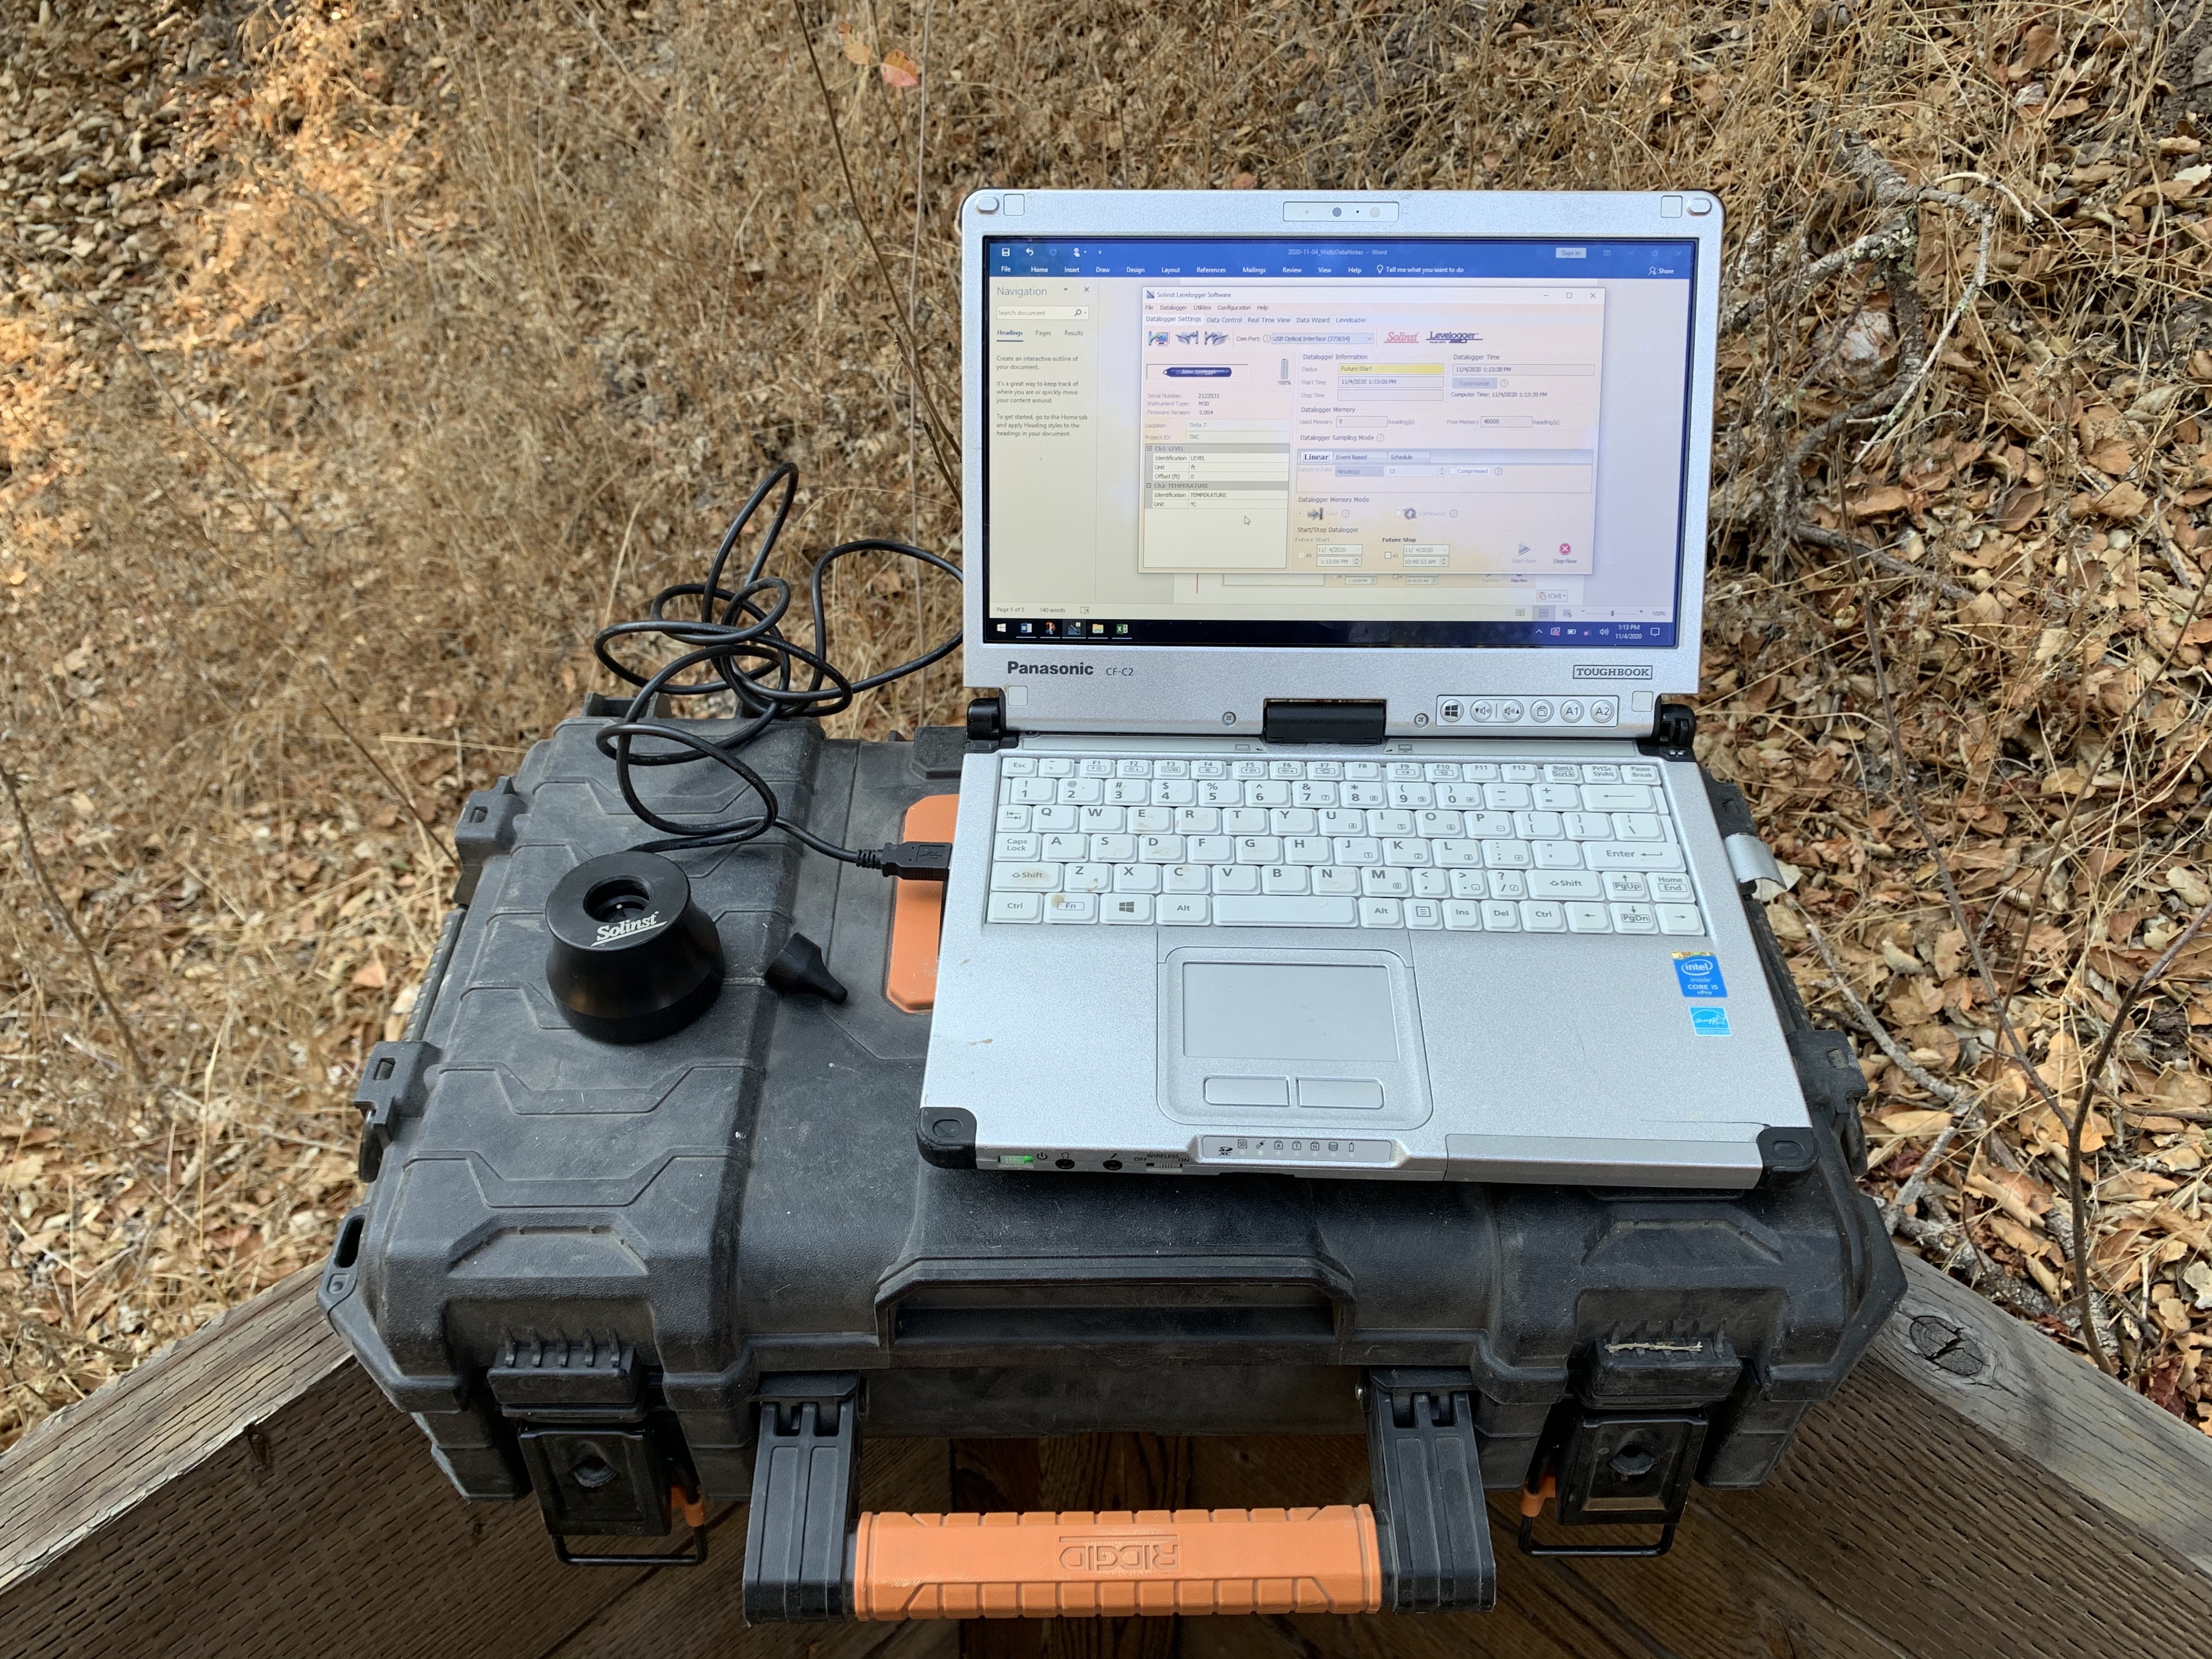 Computer recording data on the ground.